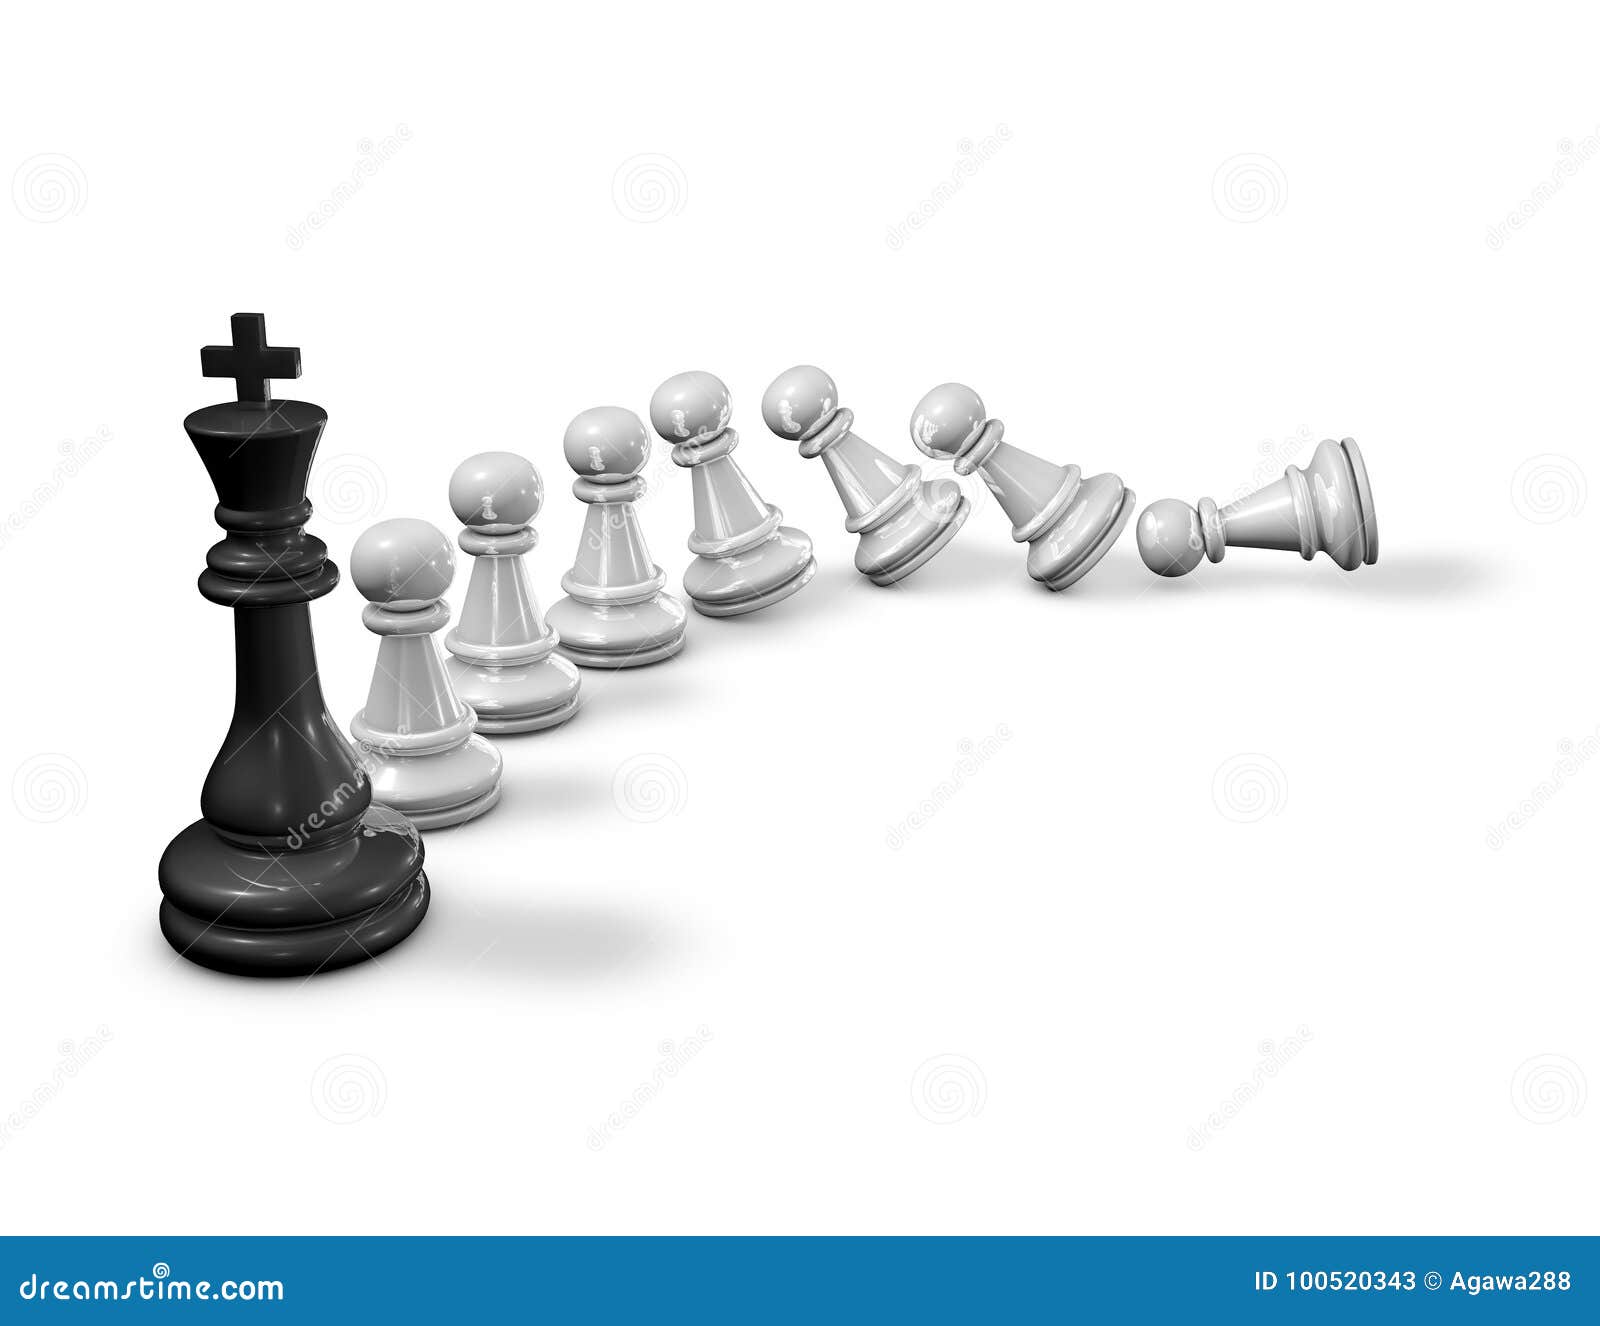 Free AI Image  View of chess pieces with dramatic and mystical